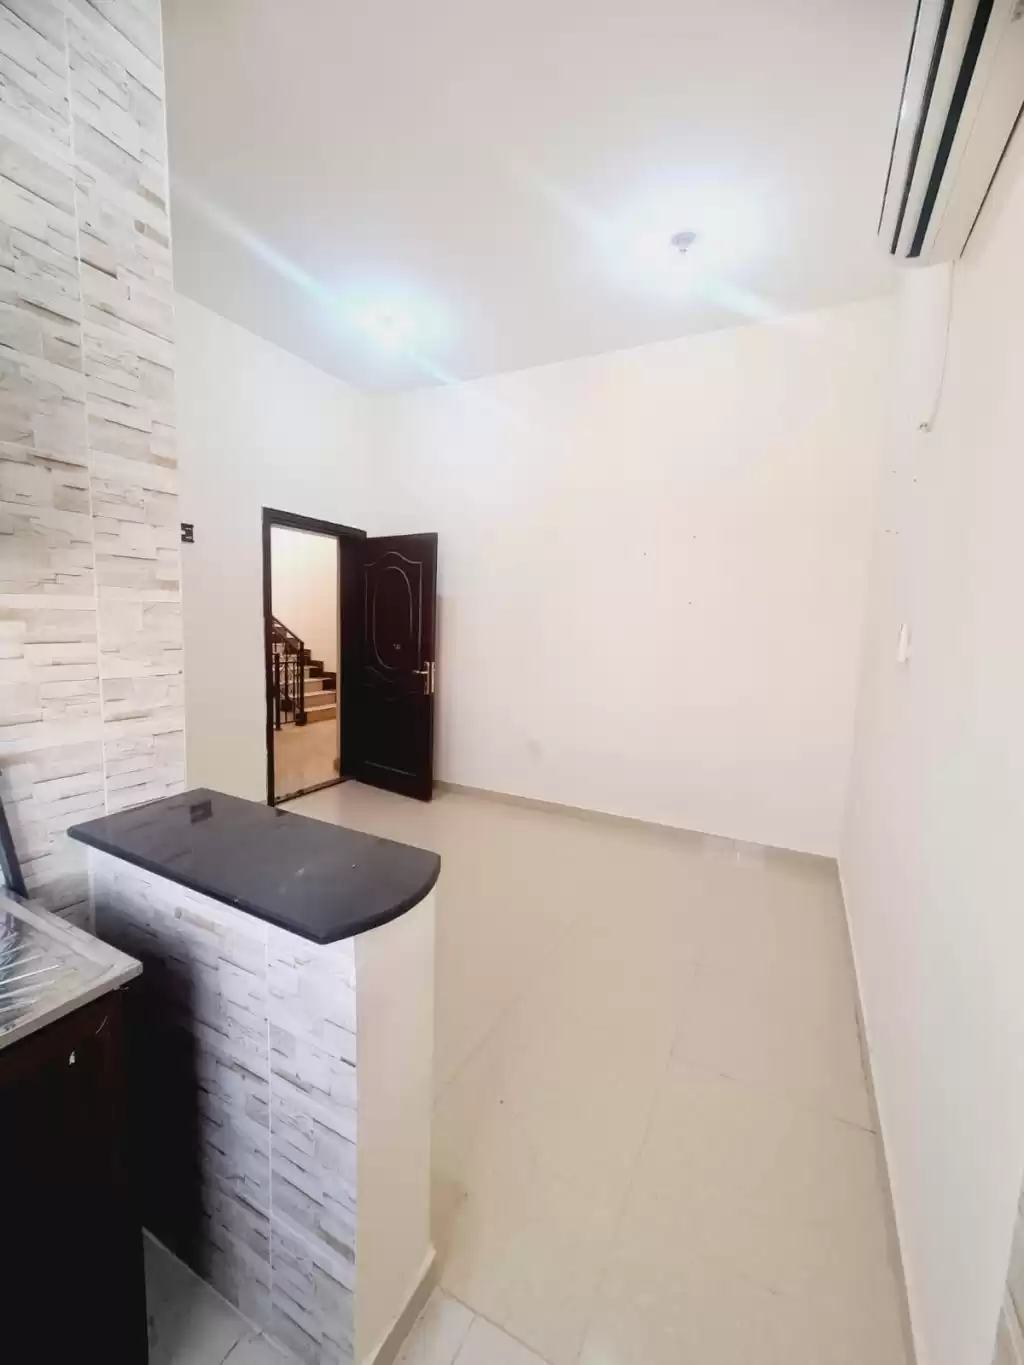 Residential Ready Property Studio U/F Apartment  for rent in Al Sadd , Doha #11982 - 1  image 